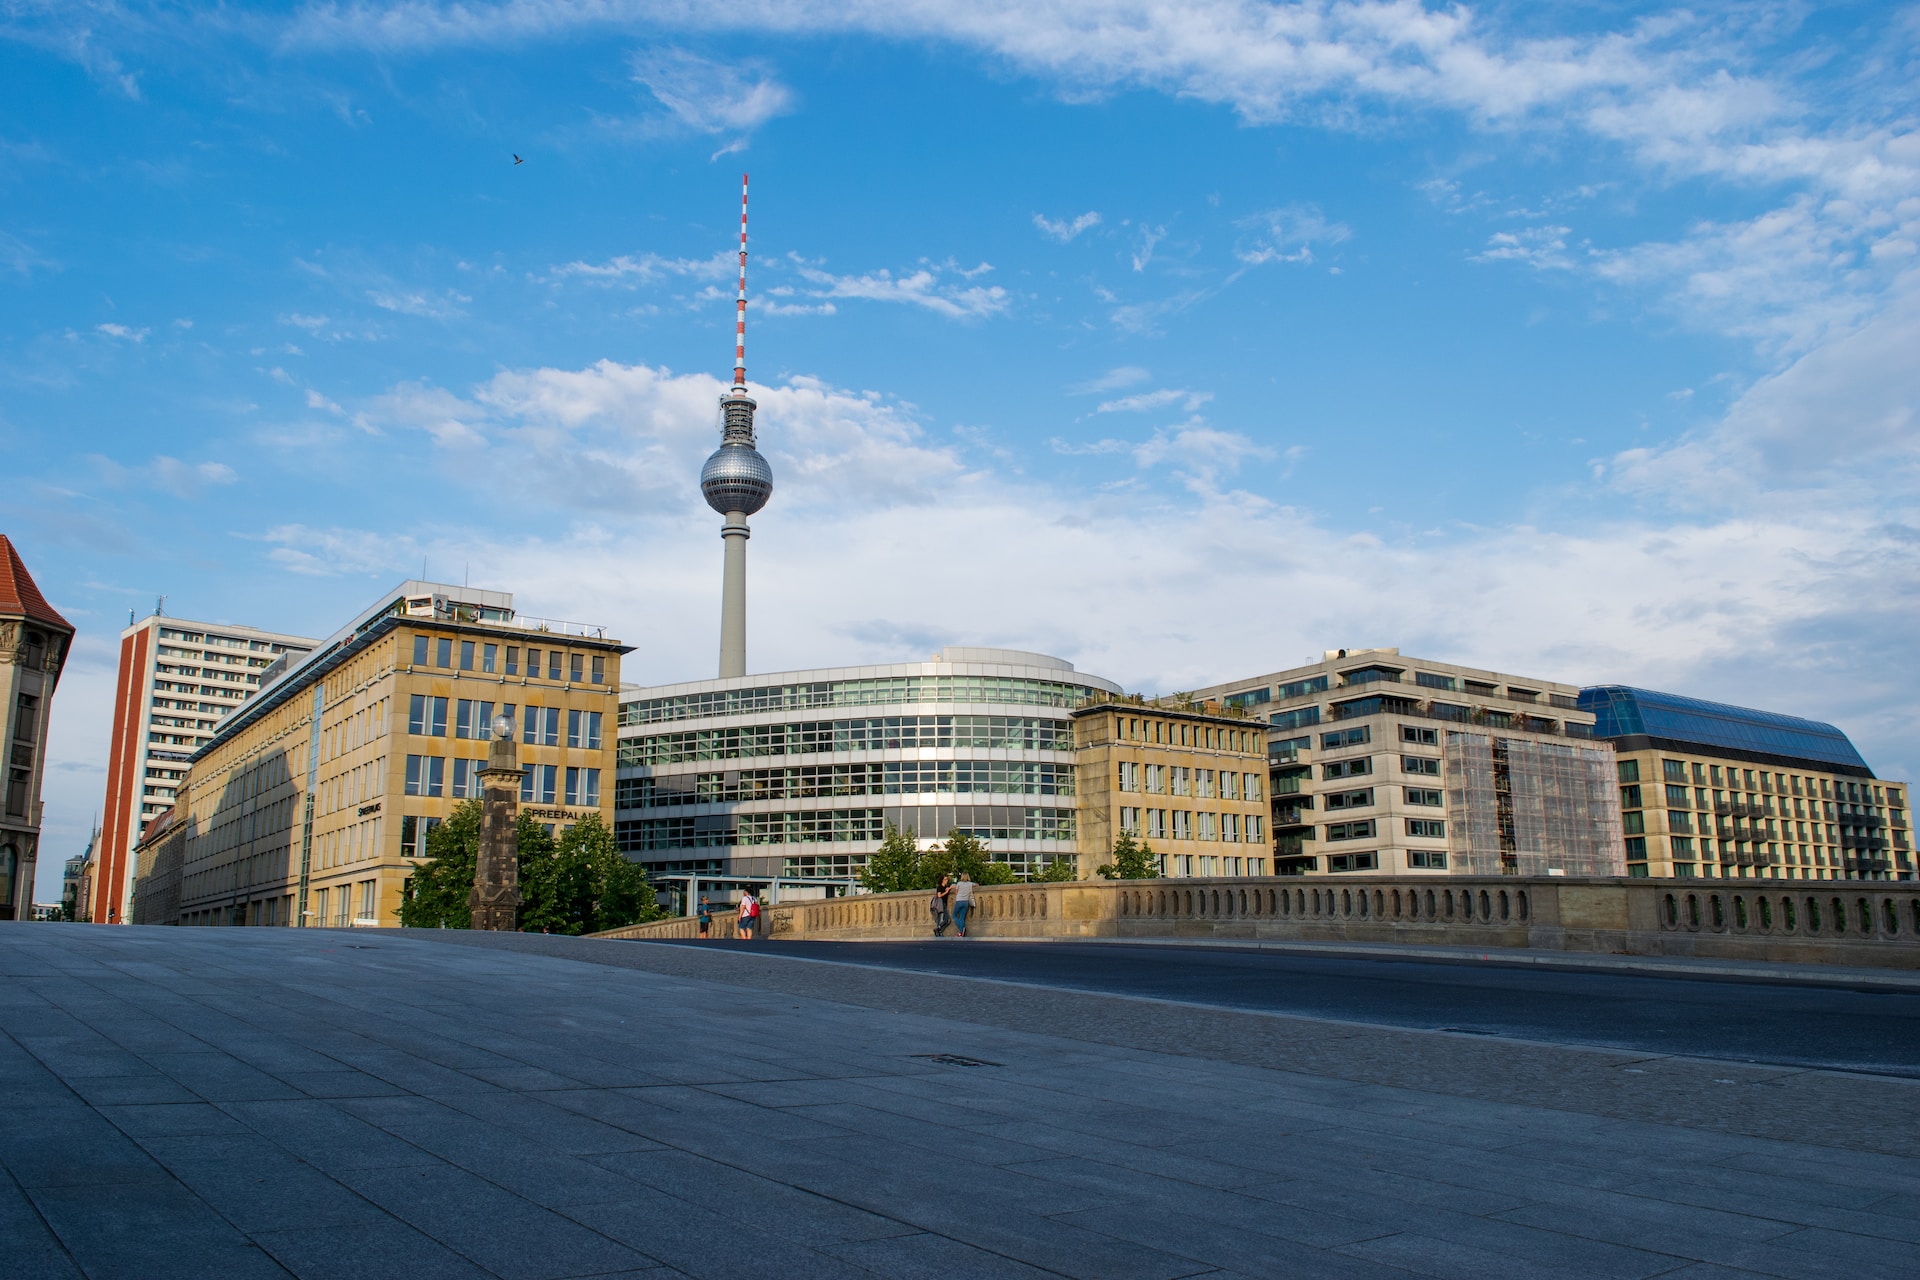 What Can You Expect from a Free Walking Tour in Berlin?